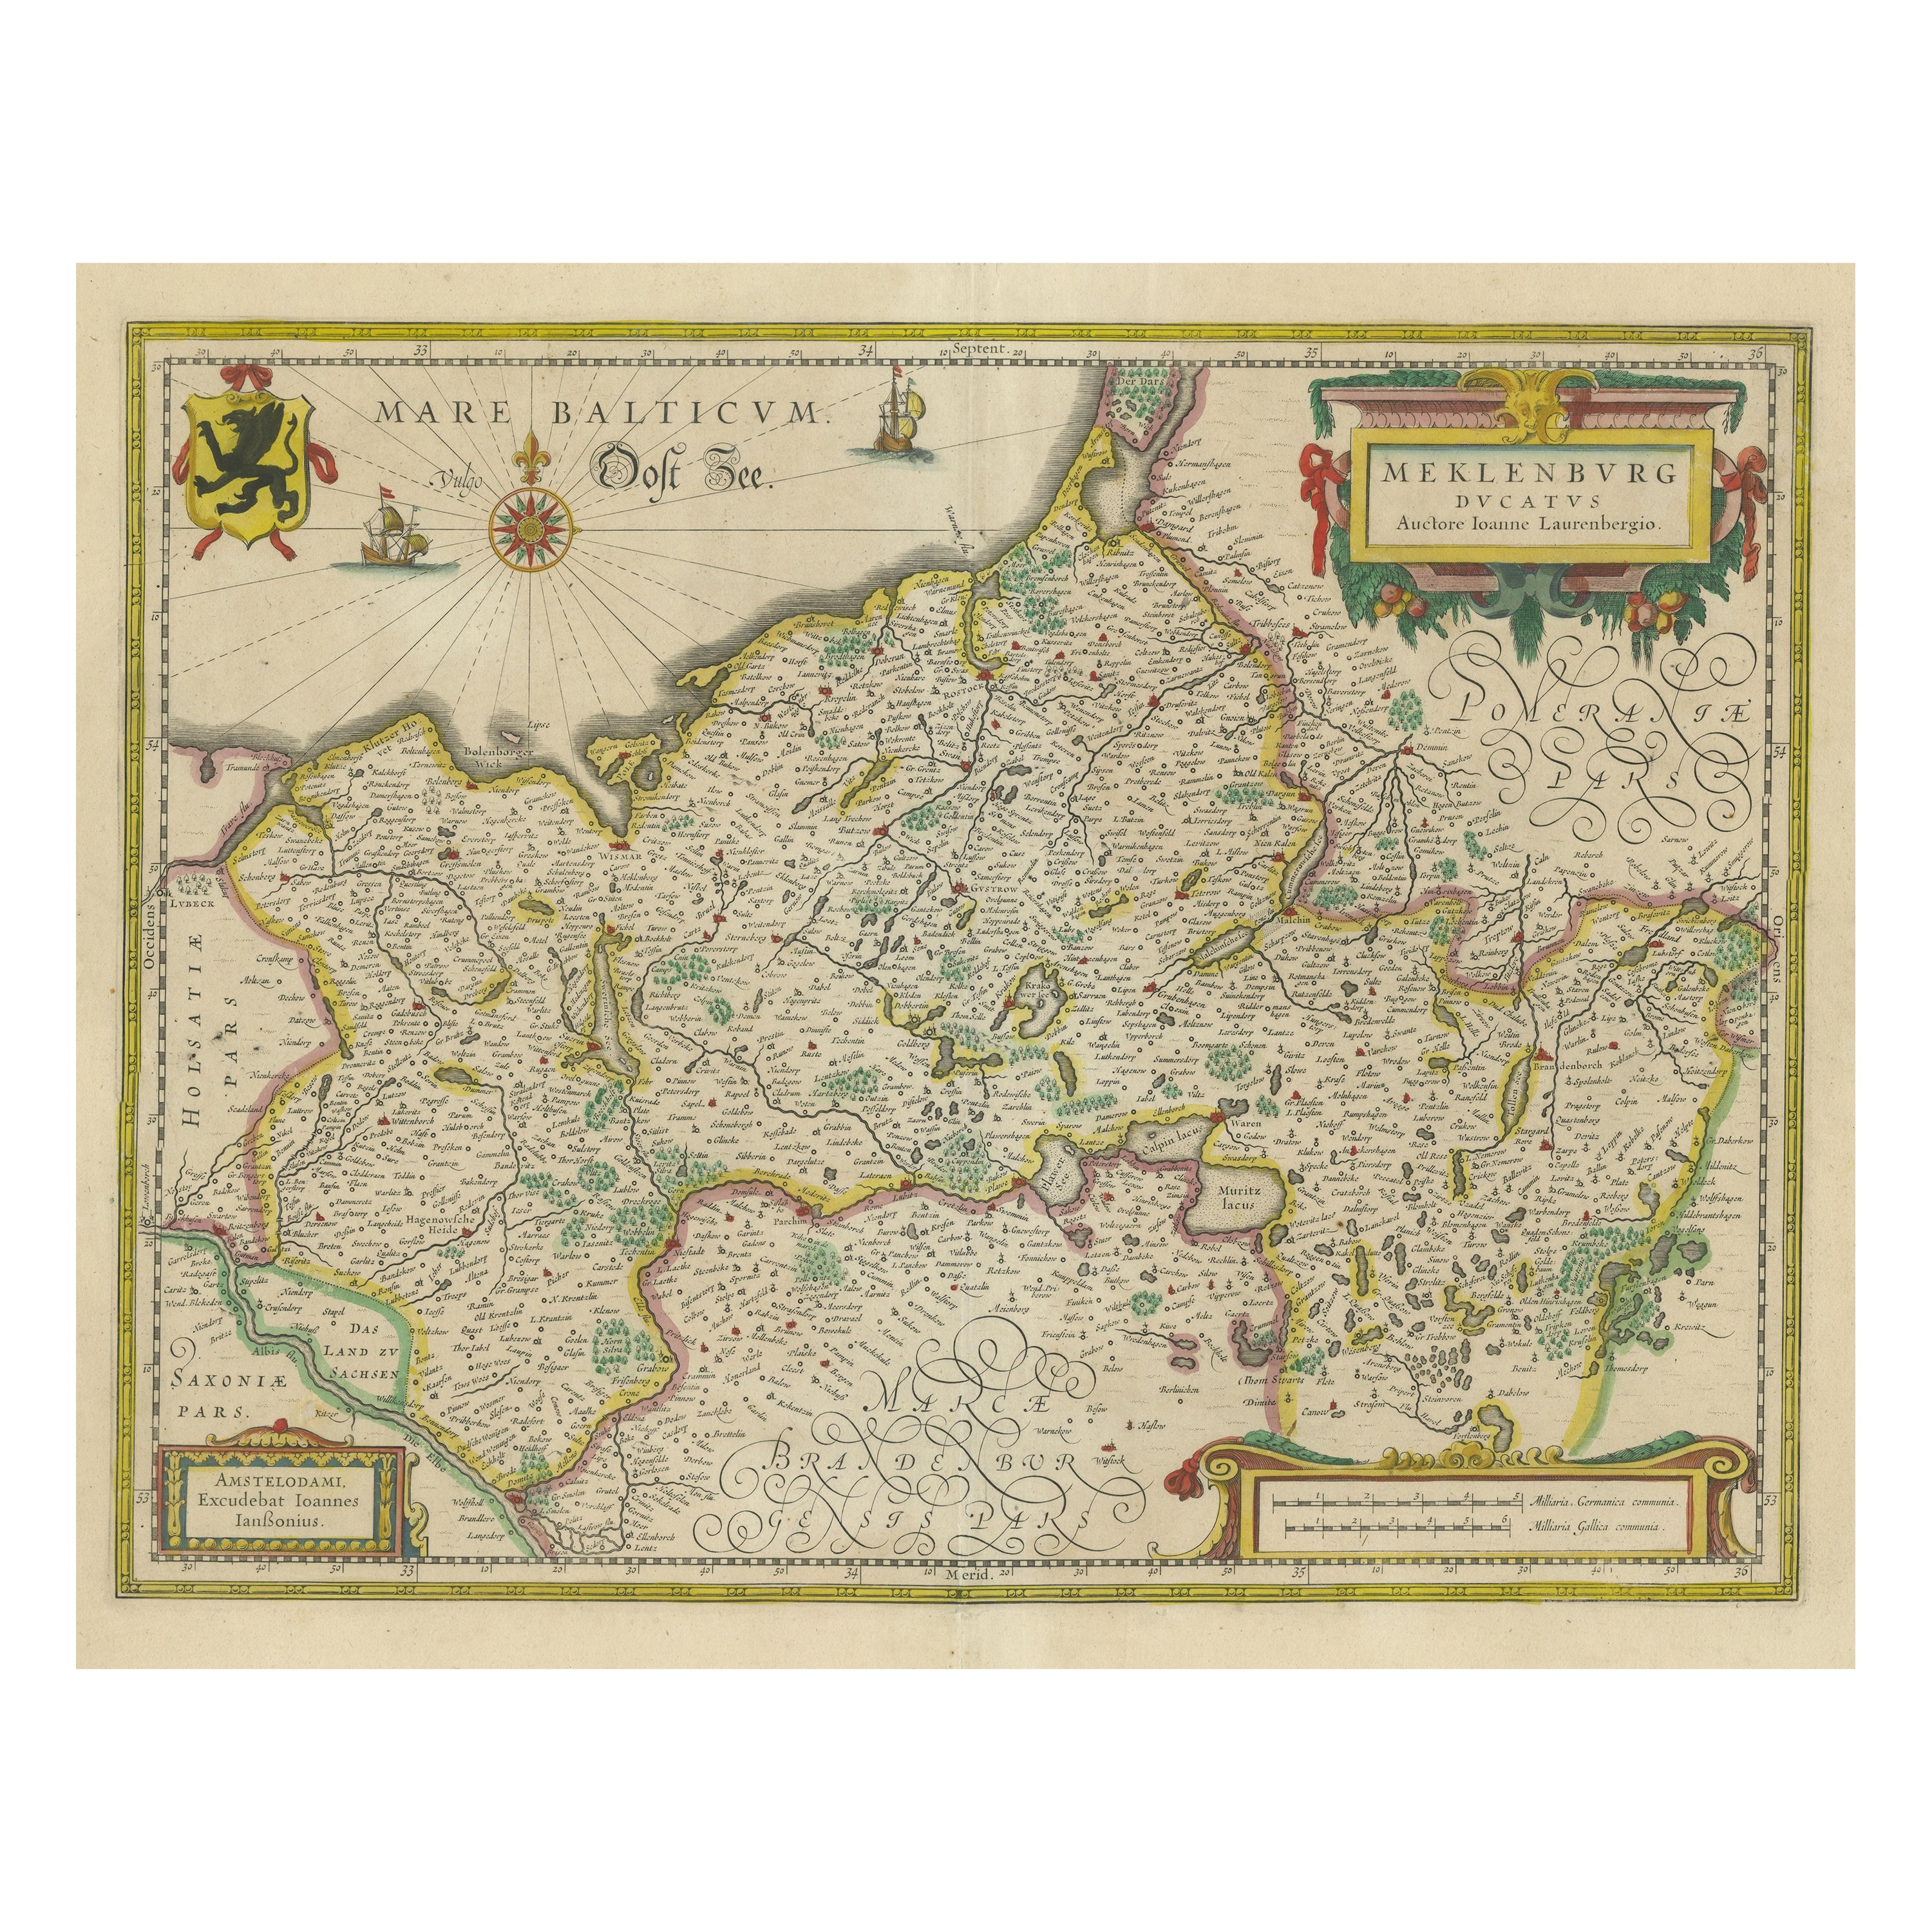 Antique Map of Northern Germany, showing the area of Mecklenburg-Vorpommern For Sale